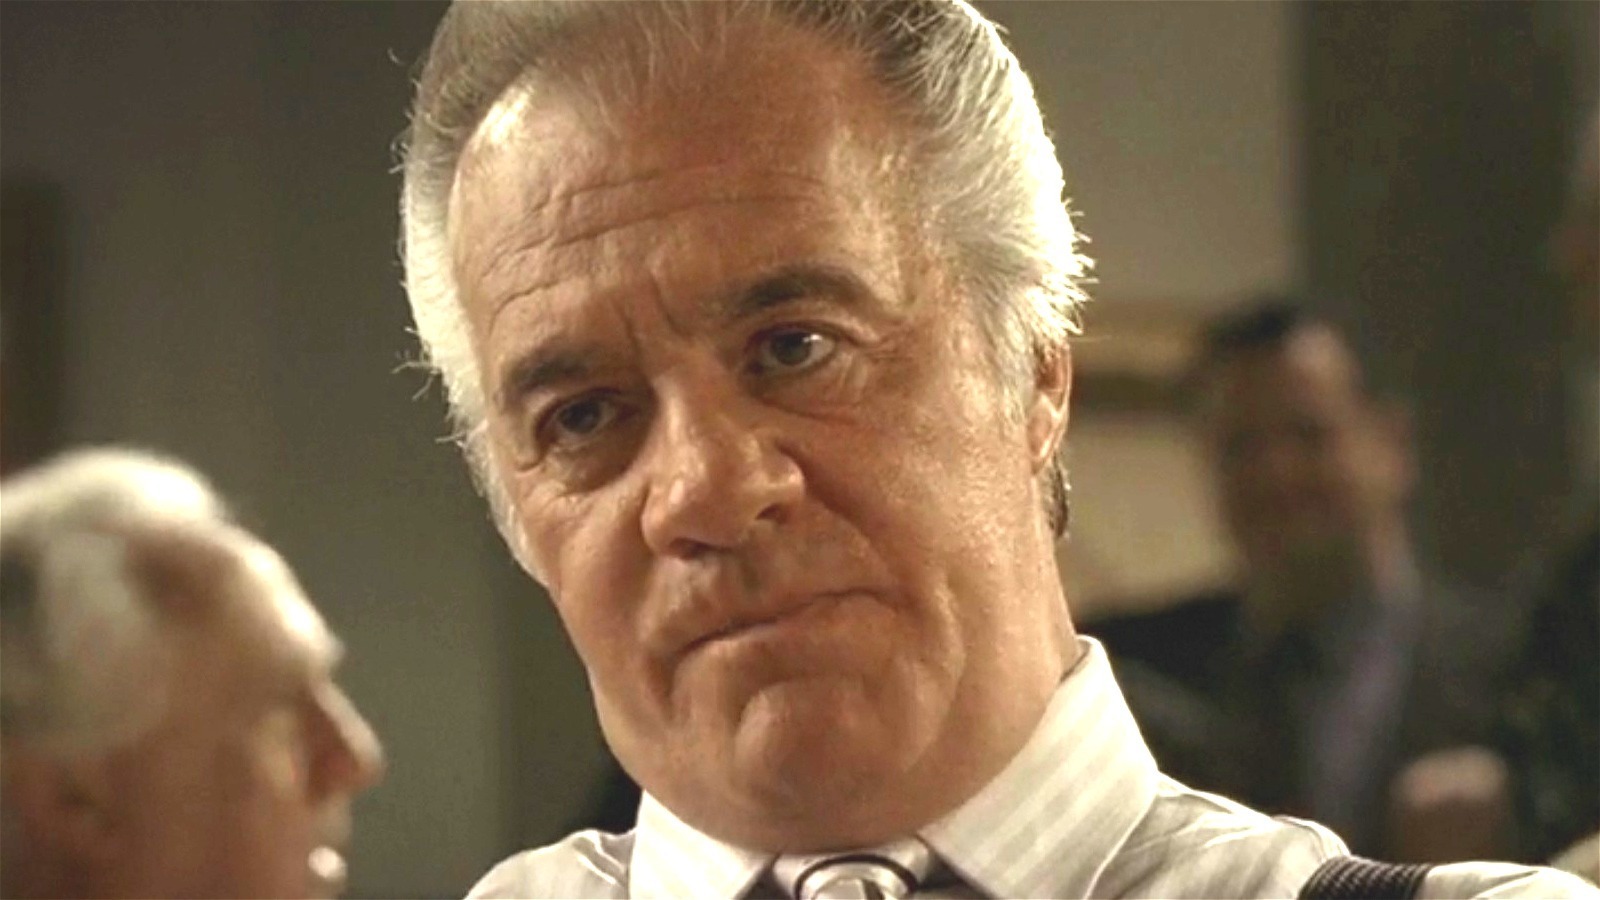 At the age of 79, Tony Sirico, star of the HBO series "The Sopranos," passed away